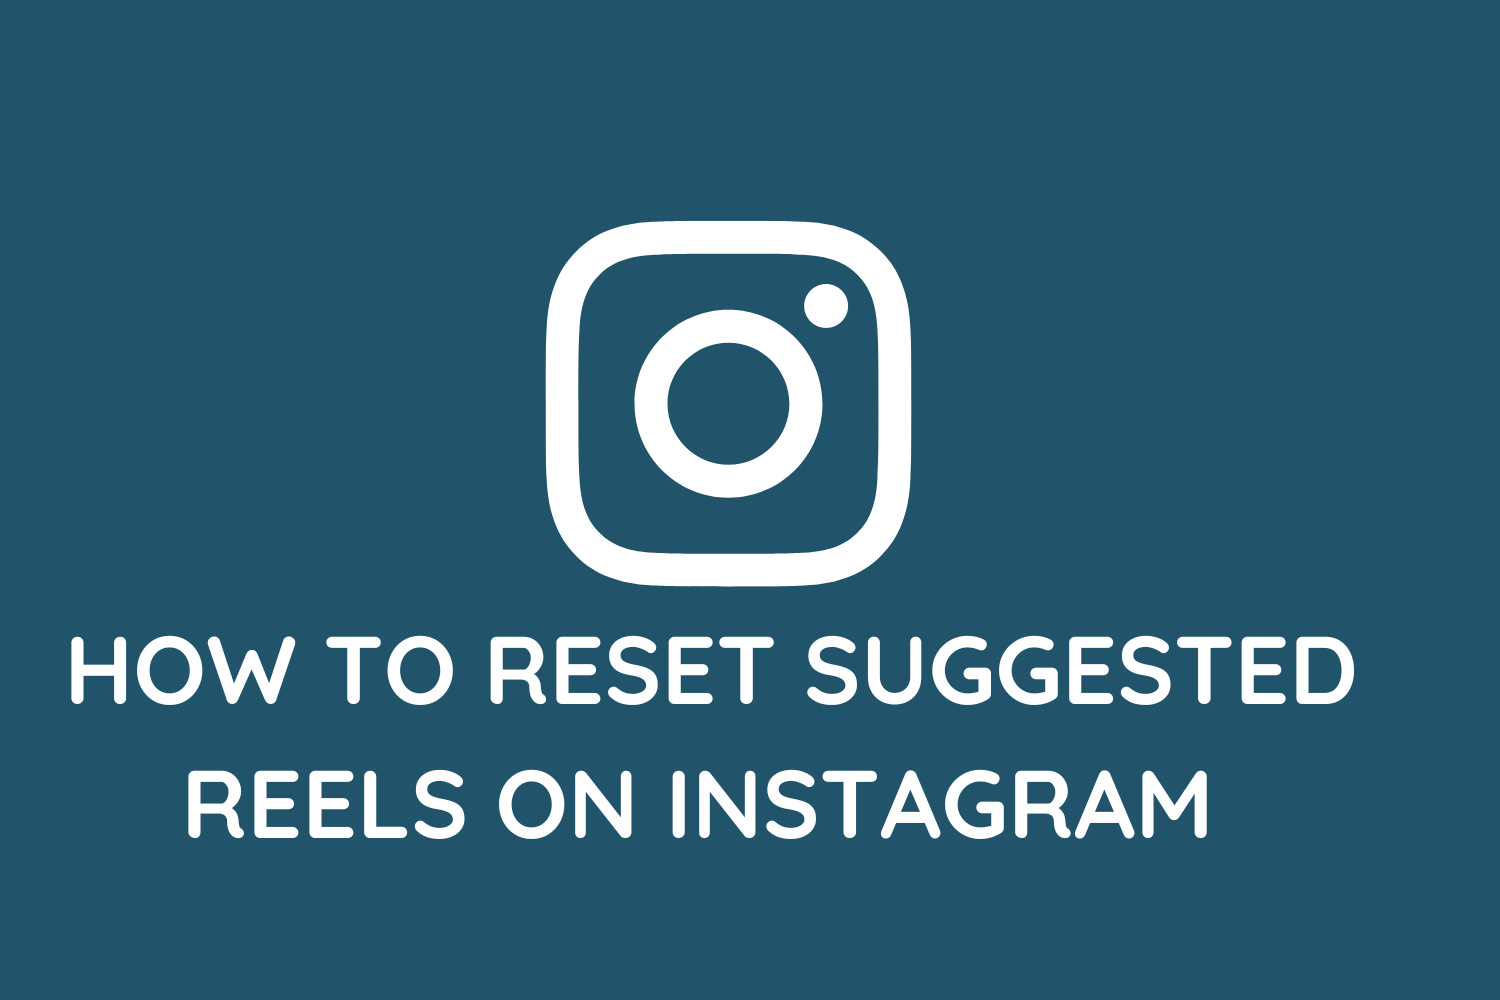 How To Reset Suggested Reels On Instagram (Easily)